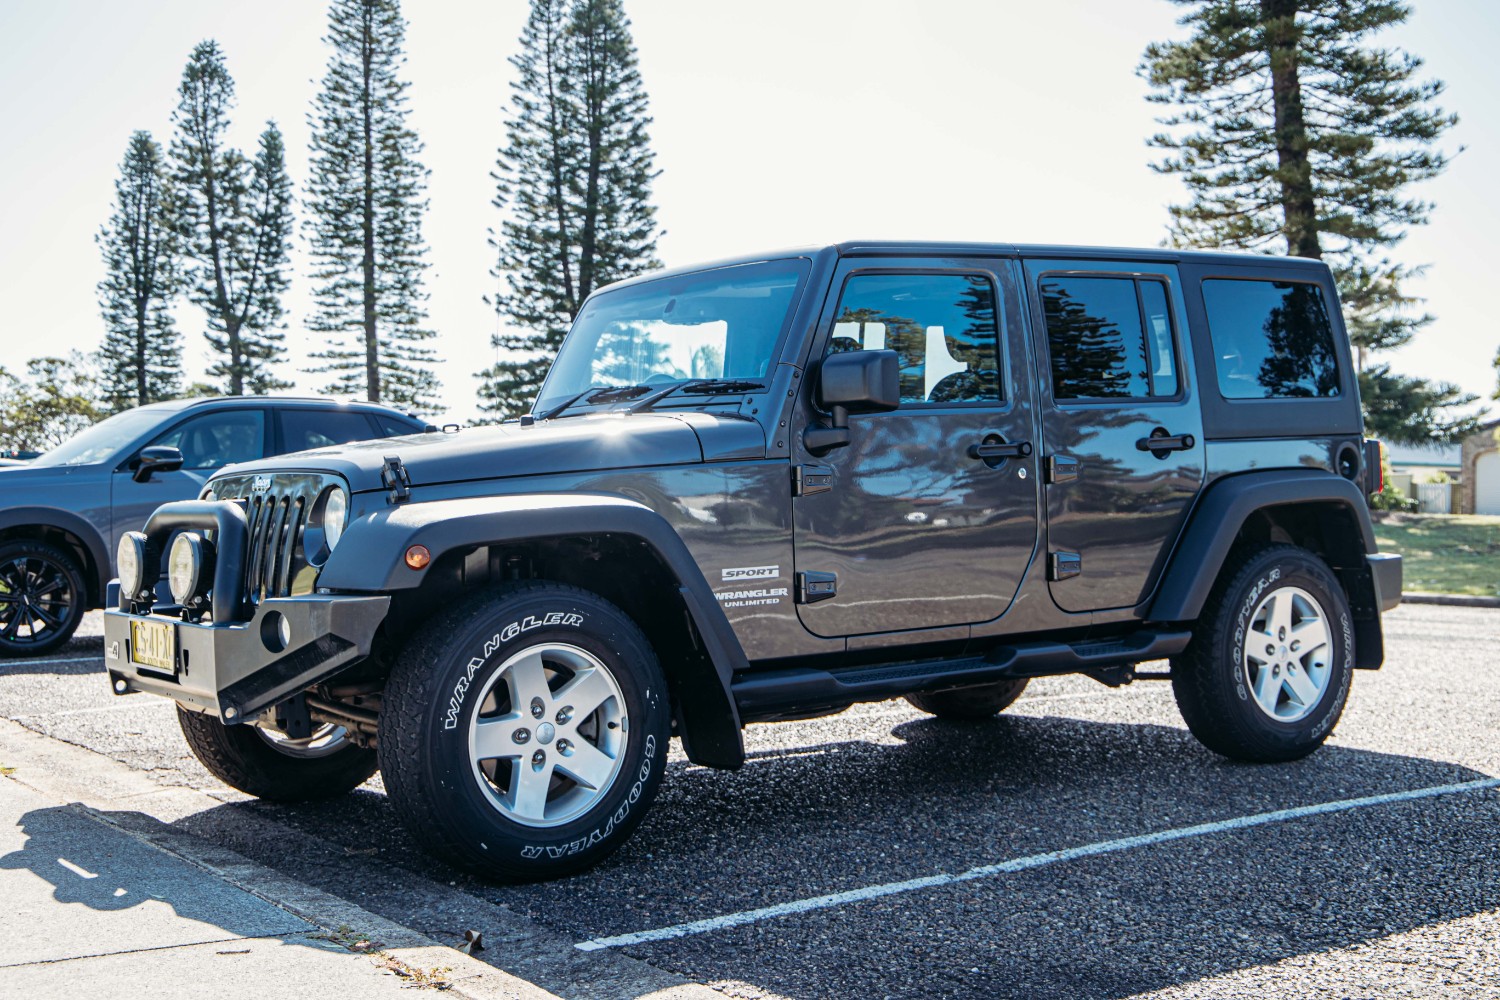 2014 Jeep Wrangler Unlimited - Sport Convertible Image 6